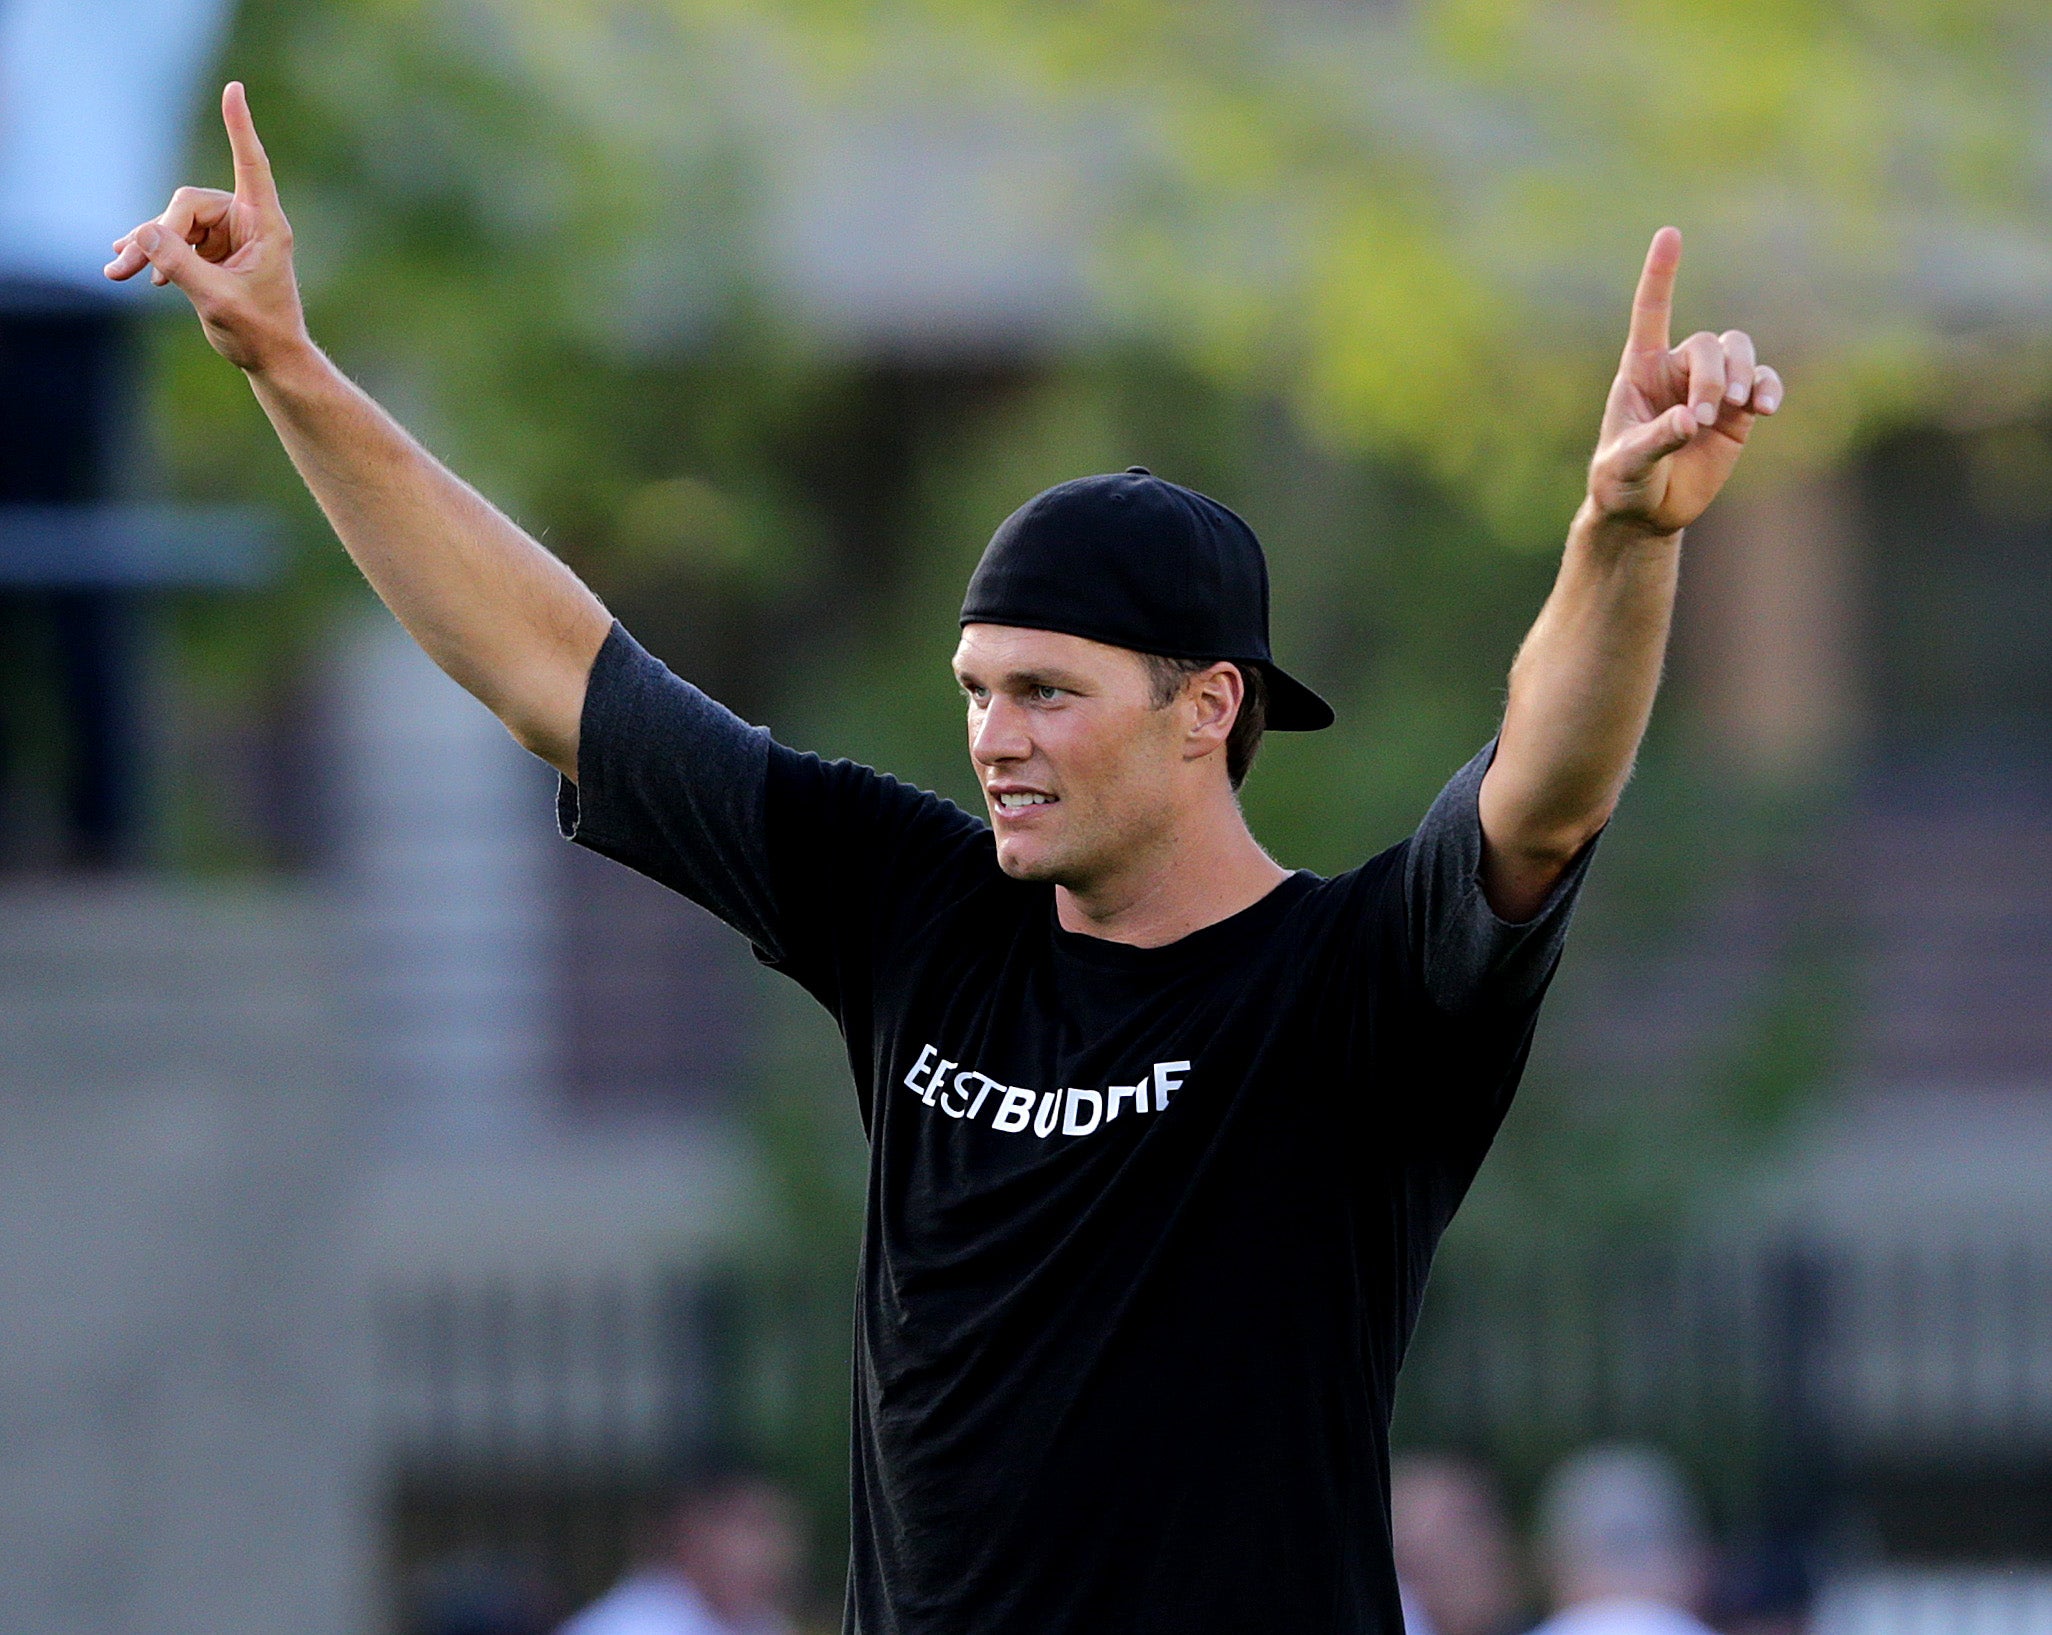 Tom Brady discussed his changing role with Best Buddies International